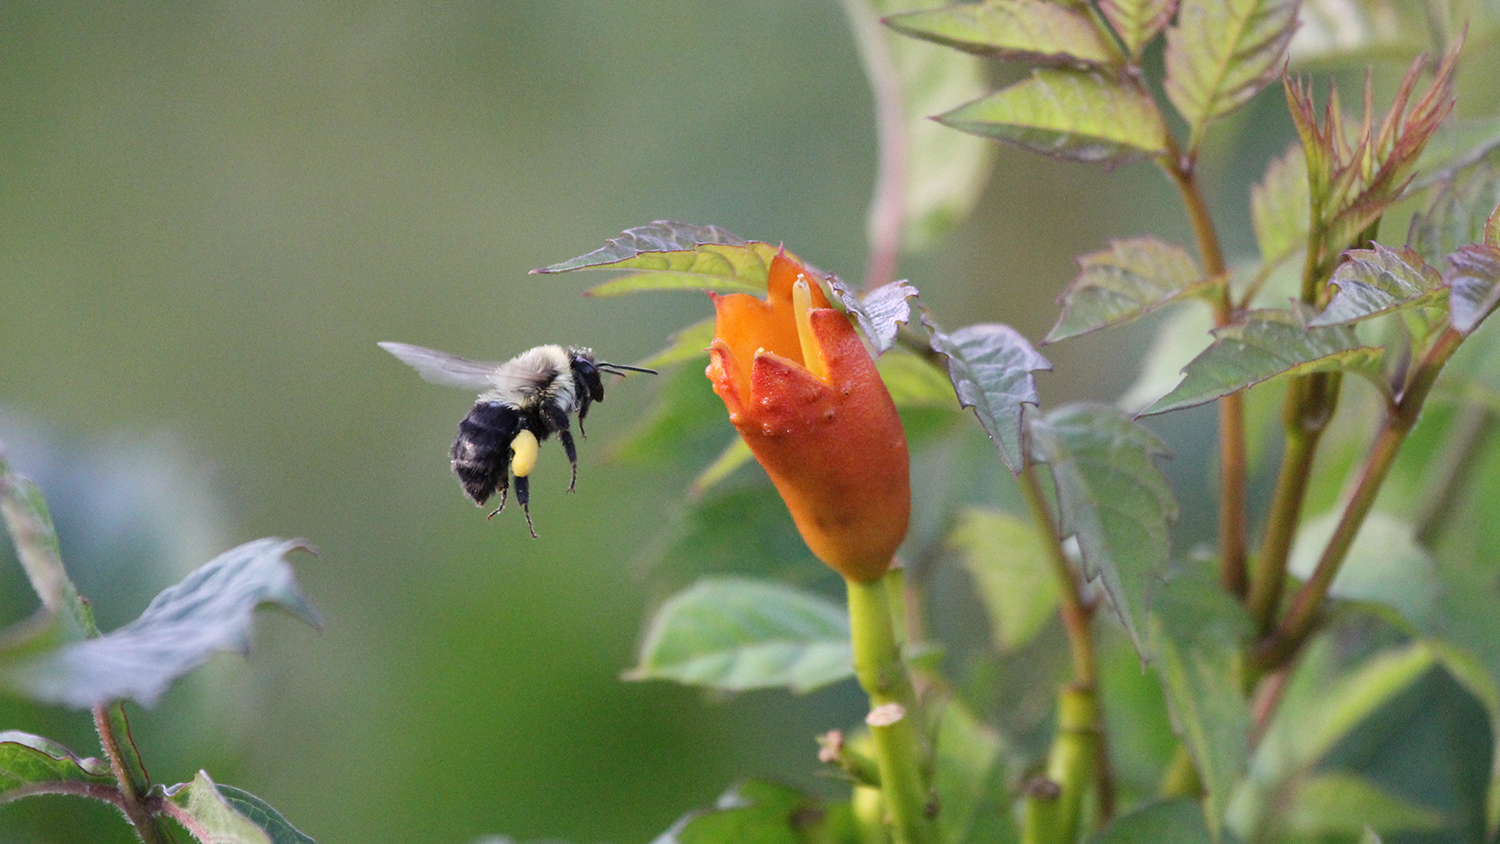 Bumble Bee - Children Prefer Faraway Wildlife to Local Nature - Forestry and Environmental Resources NC State University